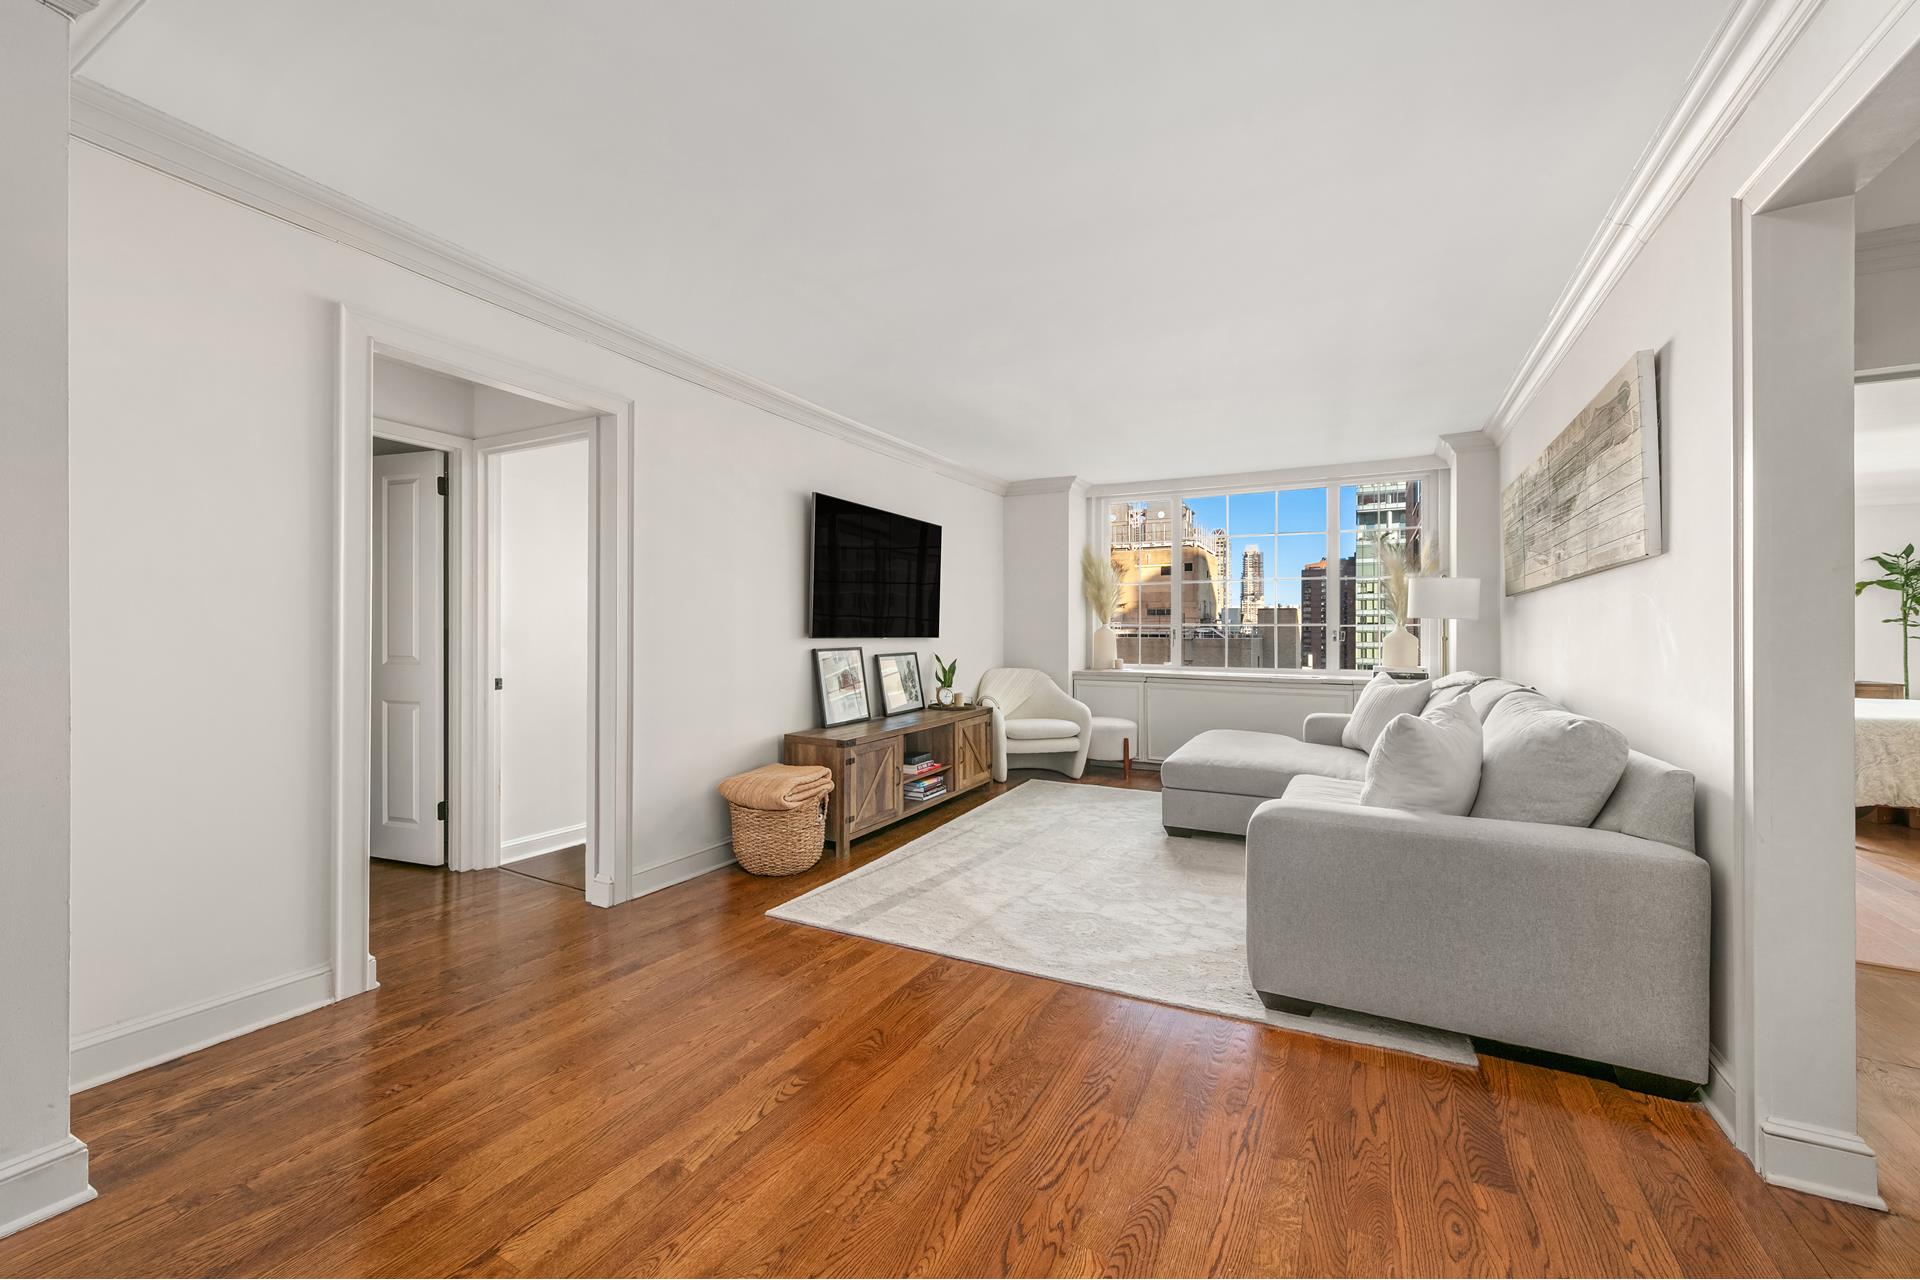 245 East 54th Street 25St, Sutton, Midtown East, NYC - 2 Bedrooms  
2 Bathrooms  
4 Rooms - 